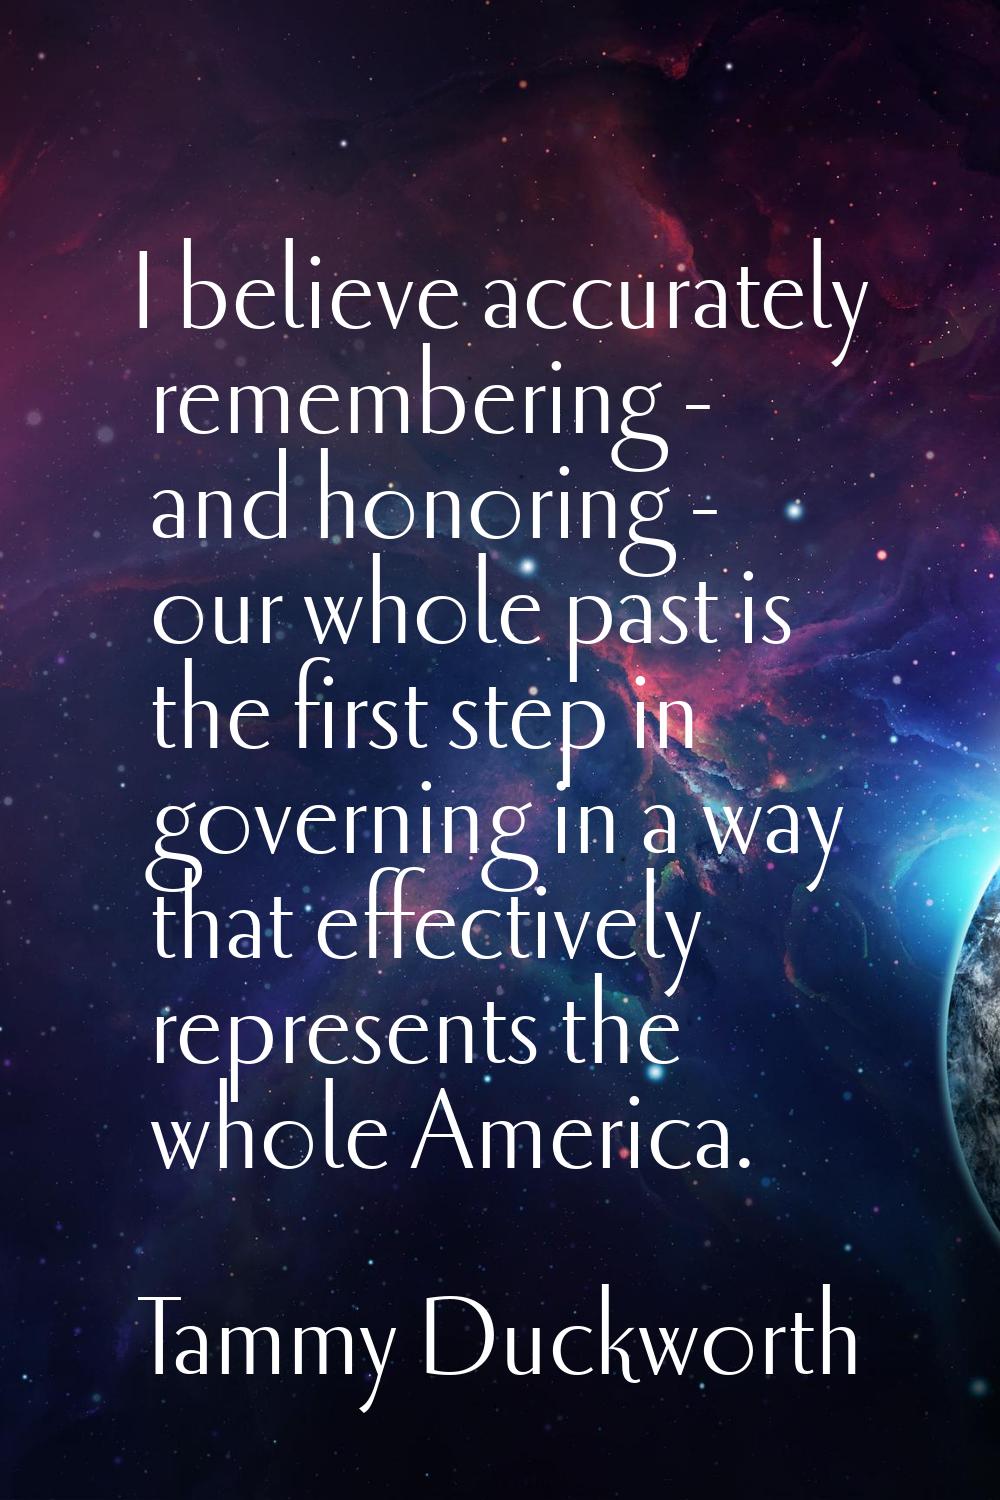 I believe accurately remembering - and honoring - our whole past is the first step in governing in 